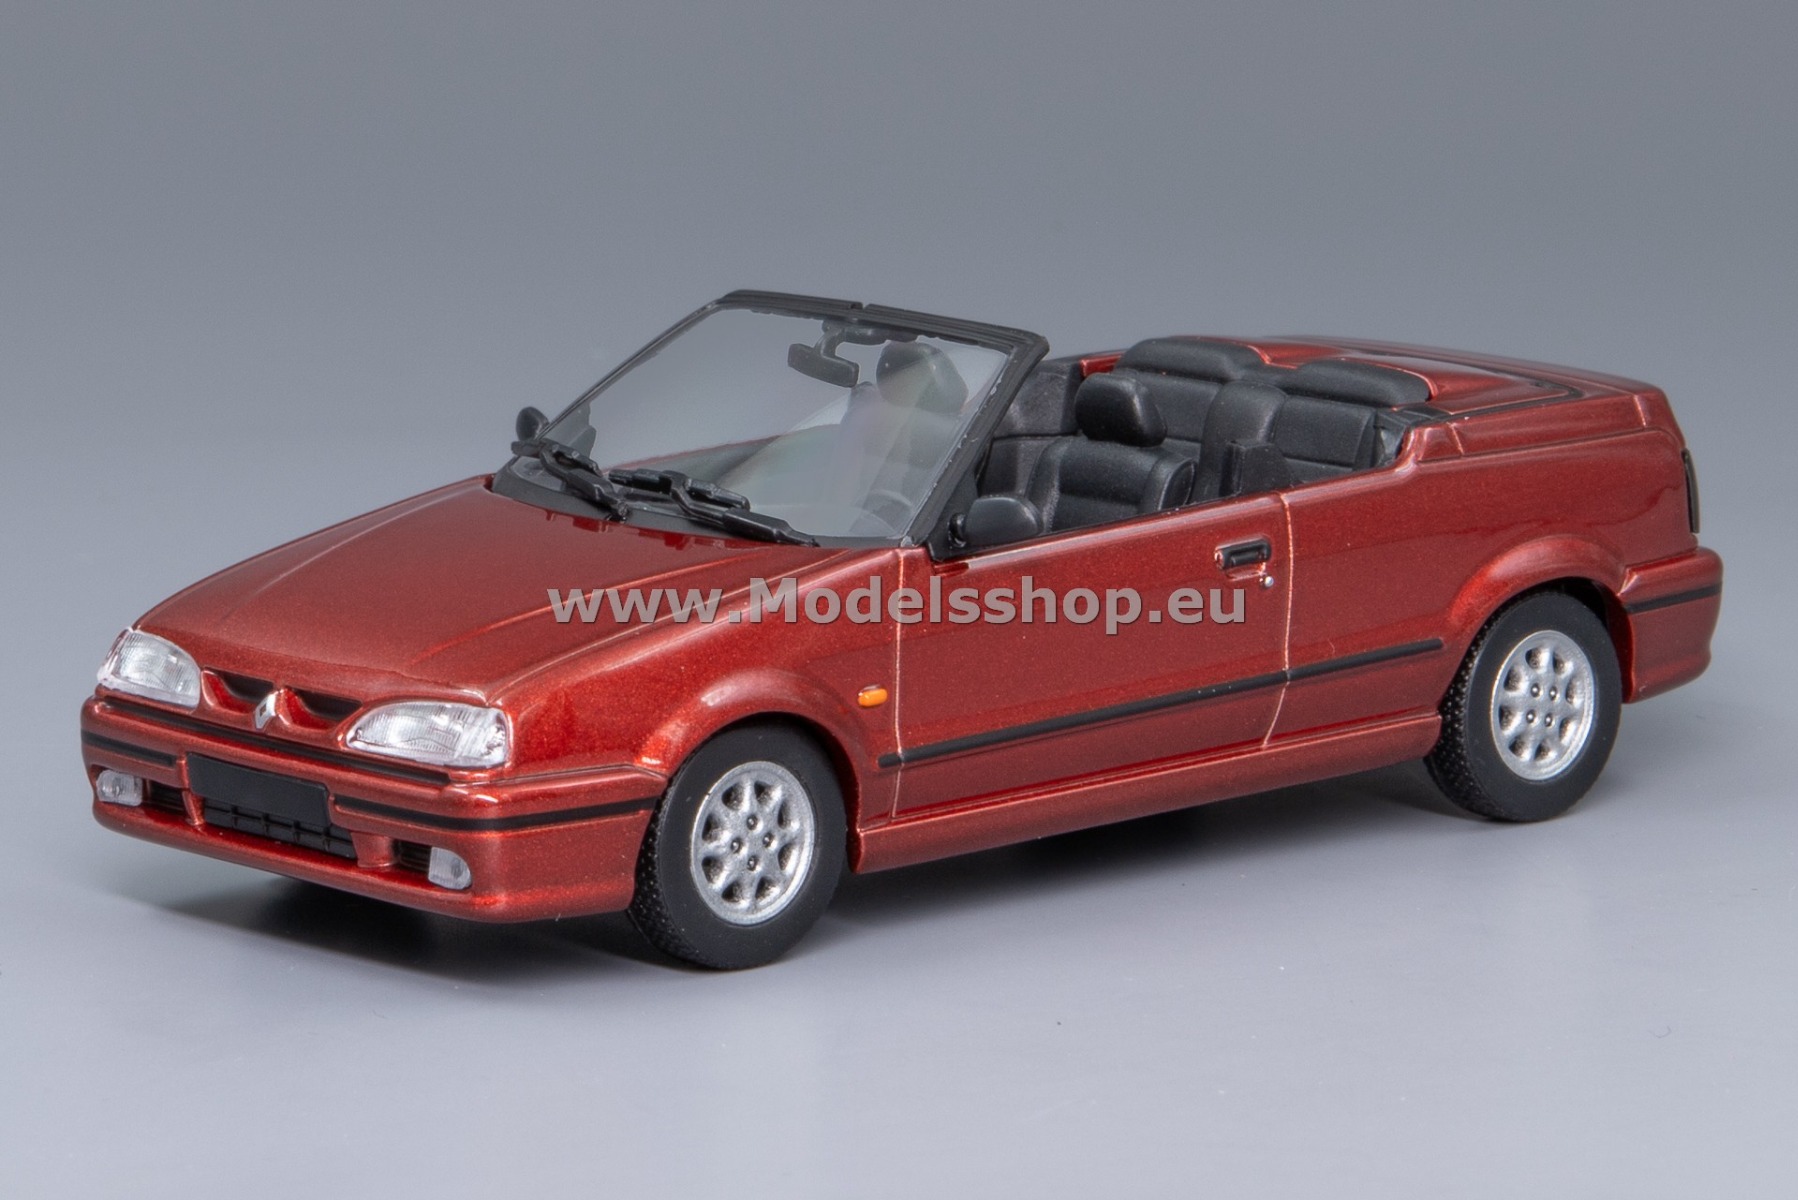 Maxichamps 940113731 Renault 19 Cabriolet, 1992 /red metallic/